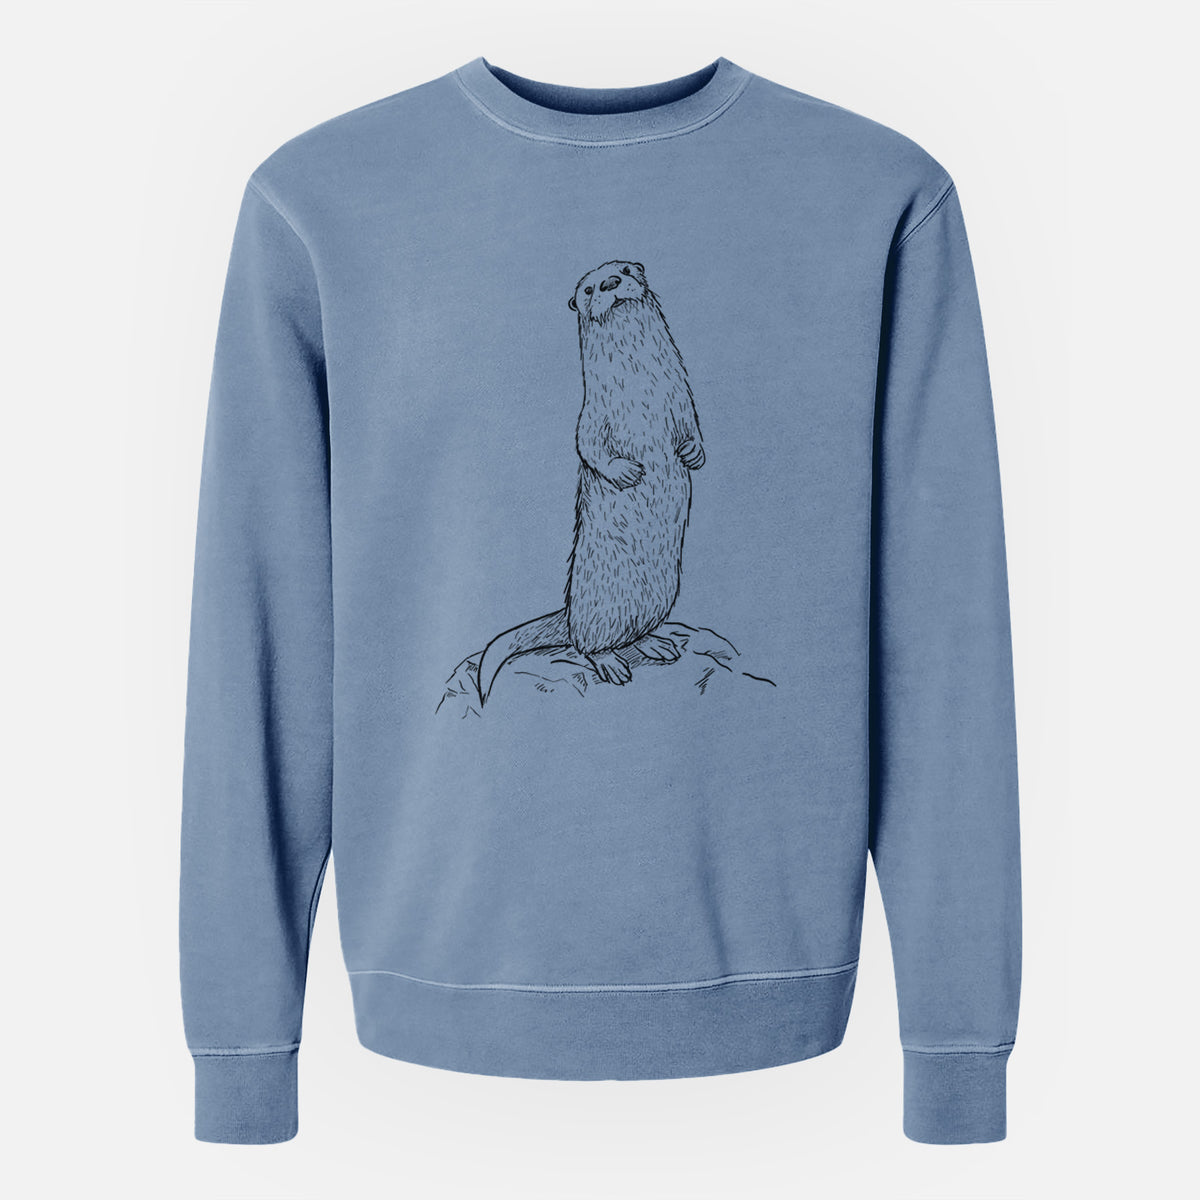 North American River Otter - Lontra canadensis - Unisex Pigment Dyed Crew Sweatshirt